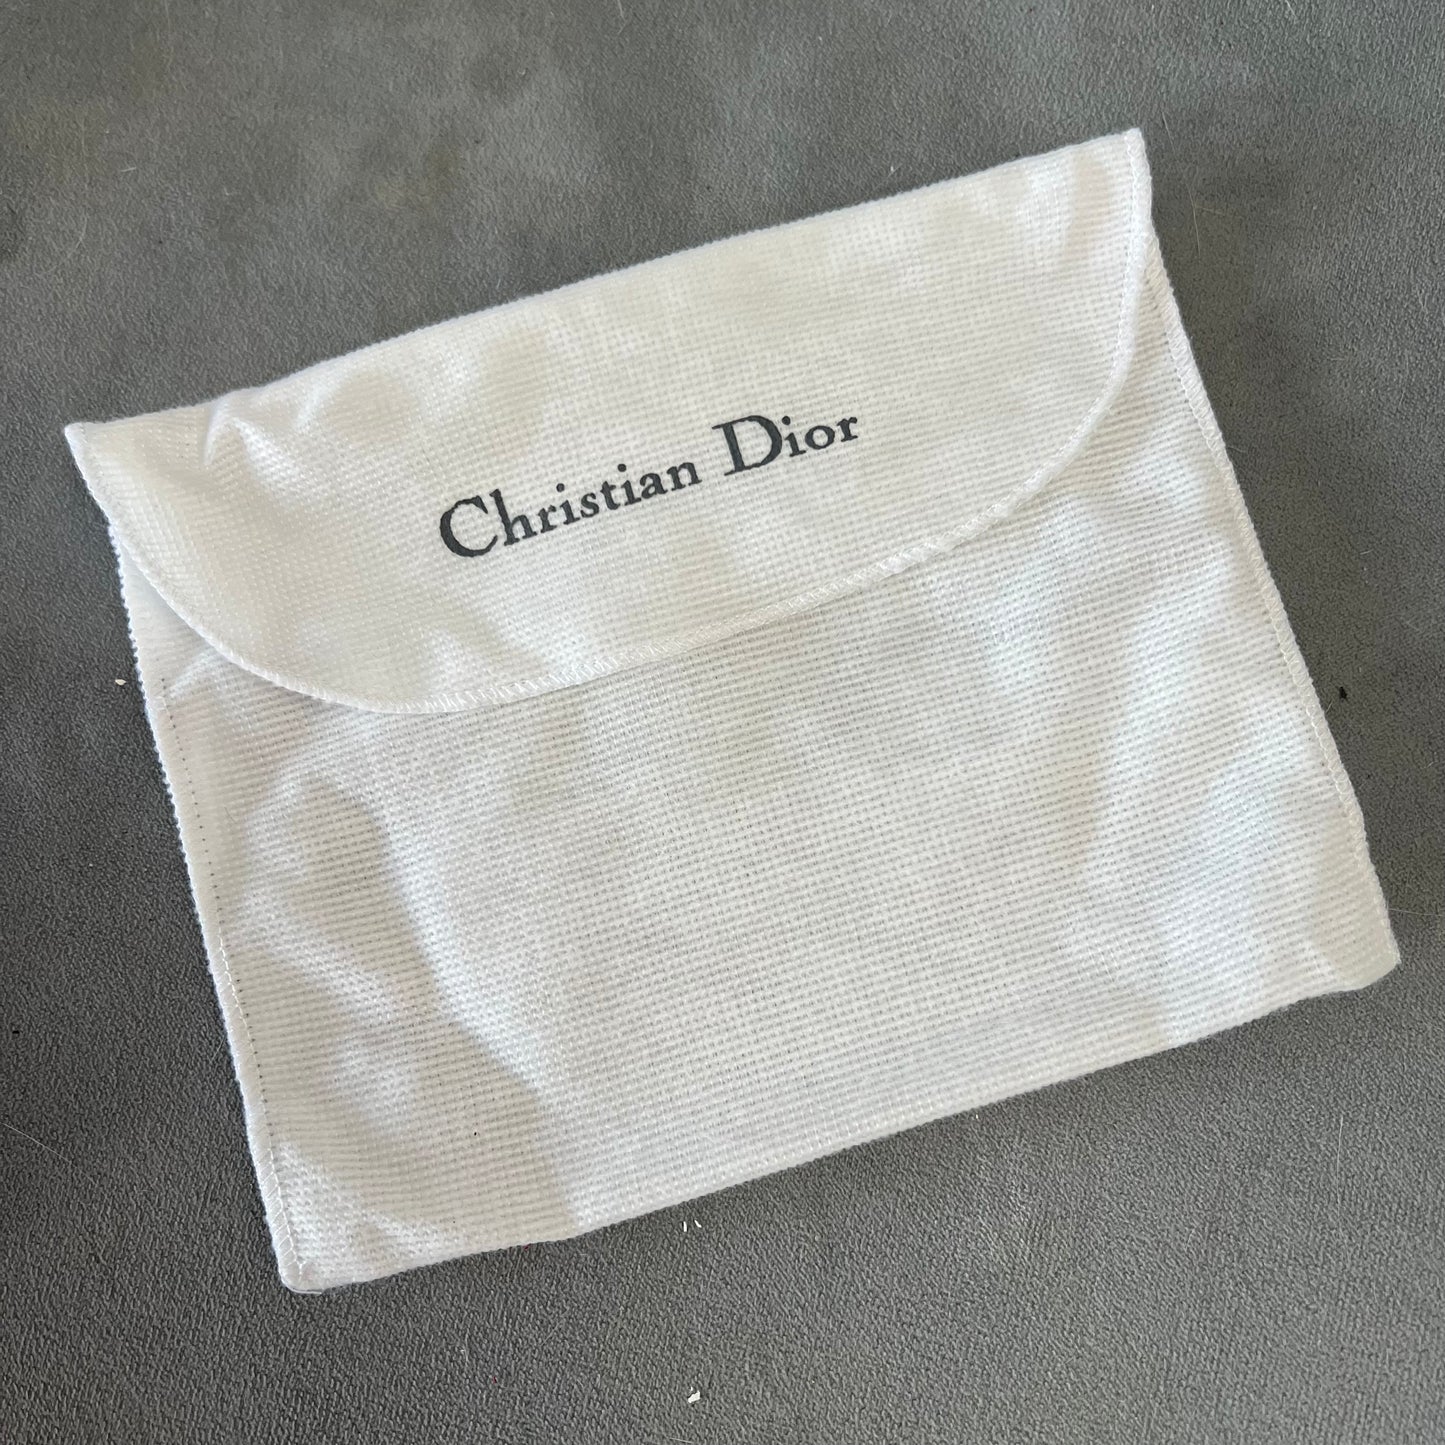 CHRISTIAN DIOR Goods Box 5.60x4.75x1.90 inches + Pouch + Tissue Paper + Filled Certificate